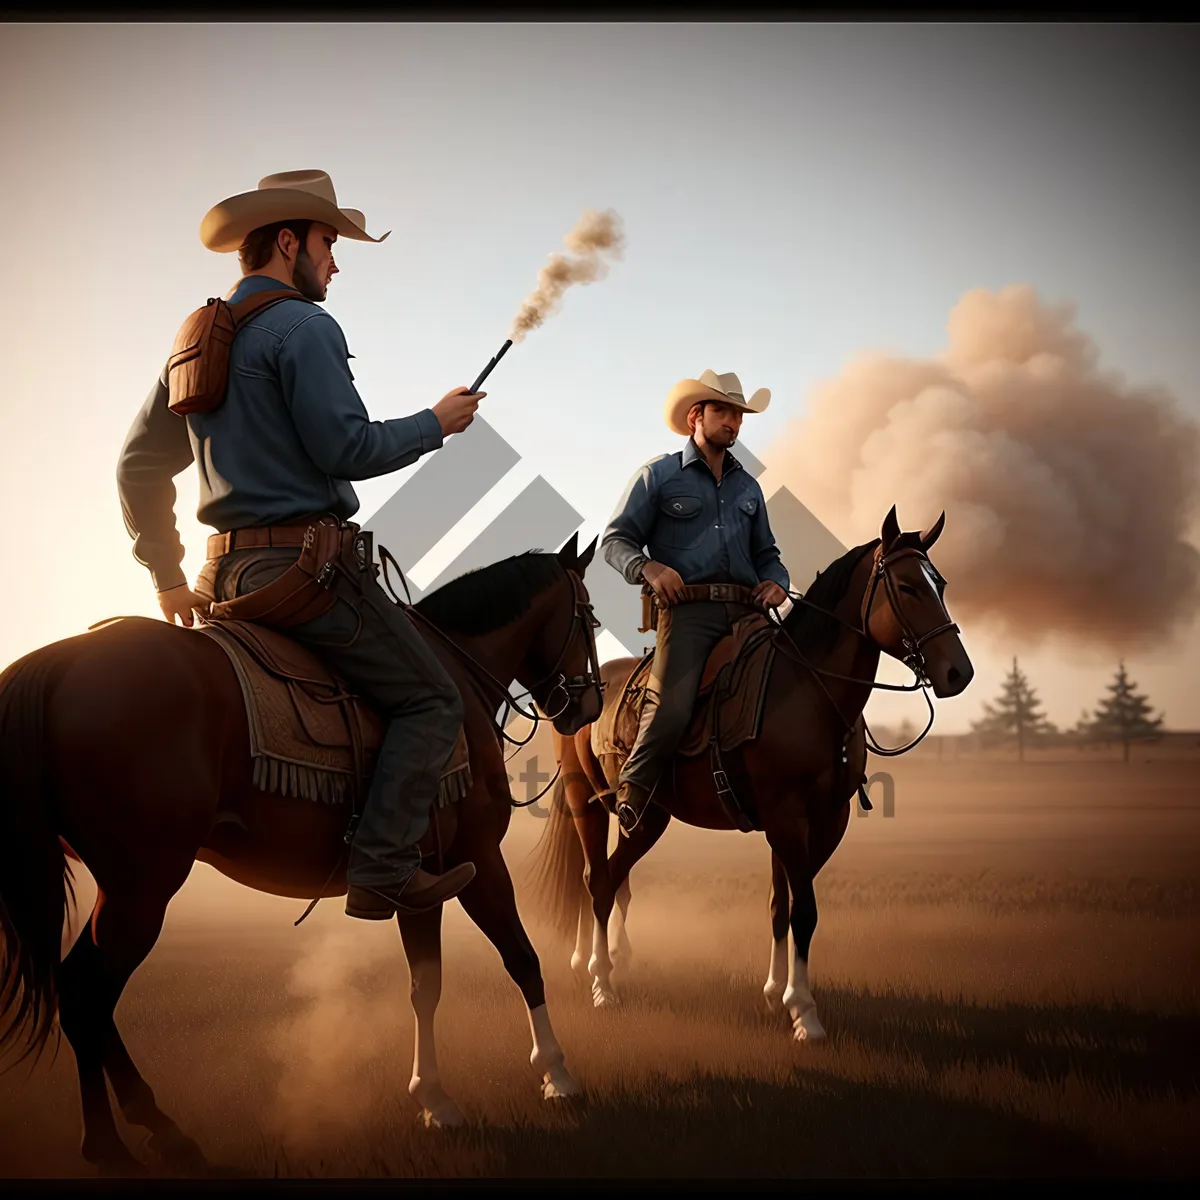 Picture of Cowboy riding horse at sunset.